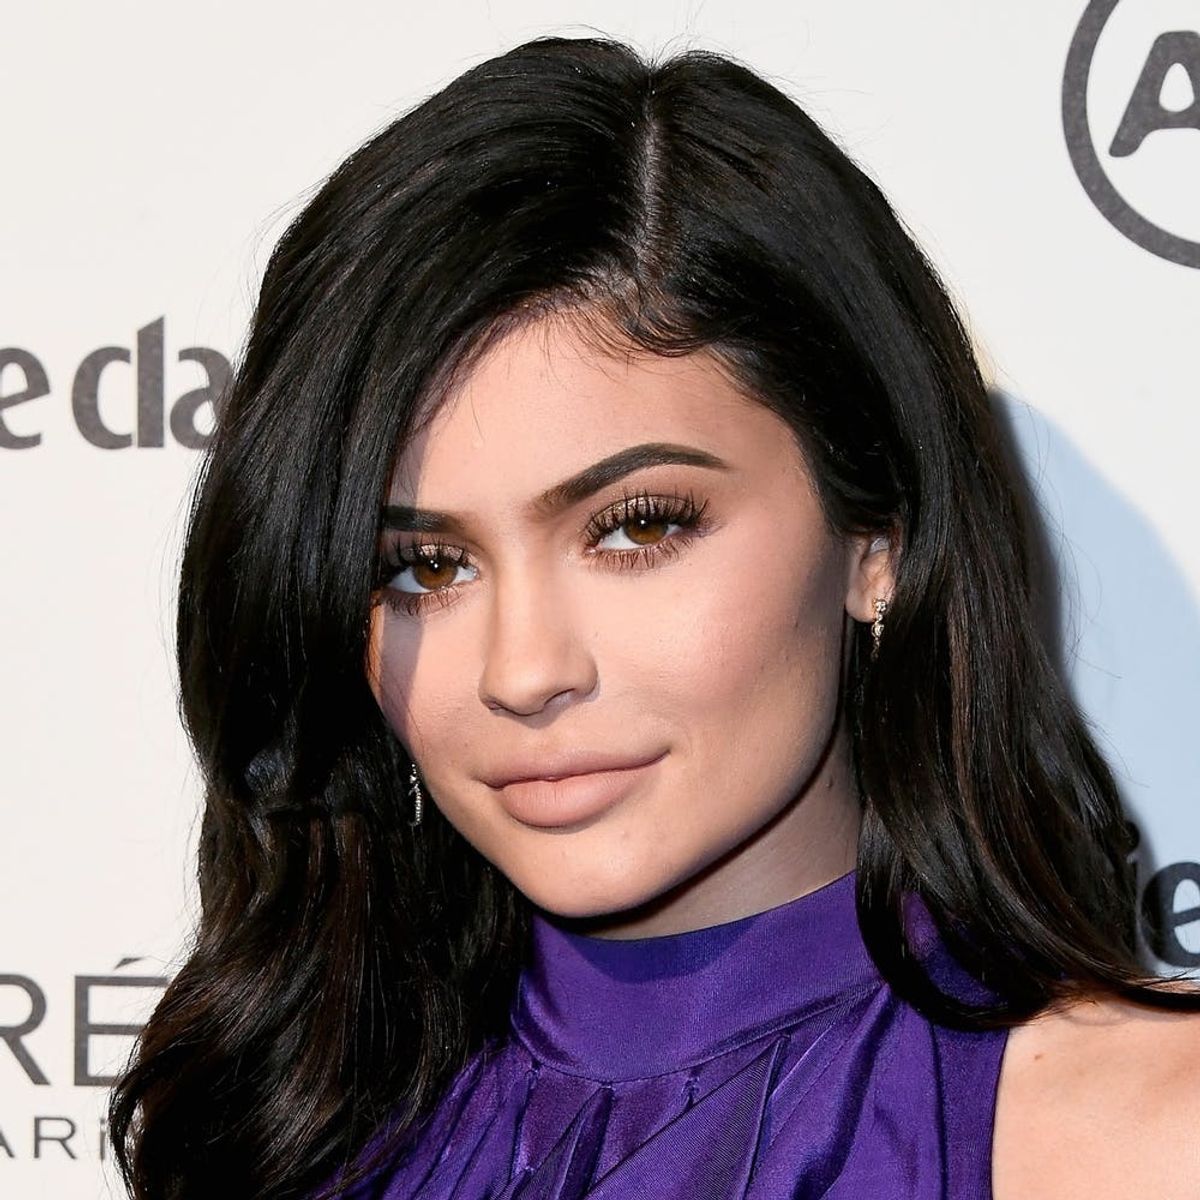 Could Kylie Jenner Be Announcing Her Pregnancy in the Next Episode of ‘KUWTK?’